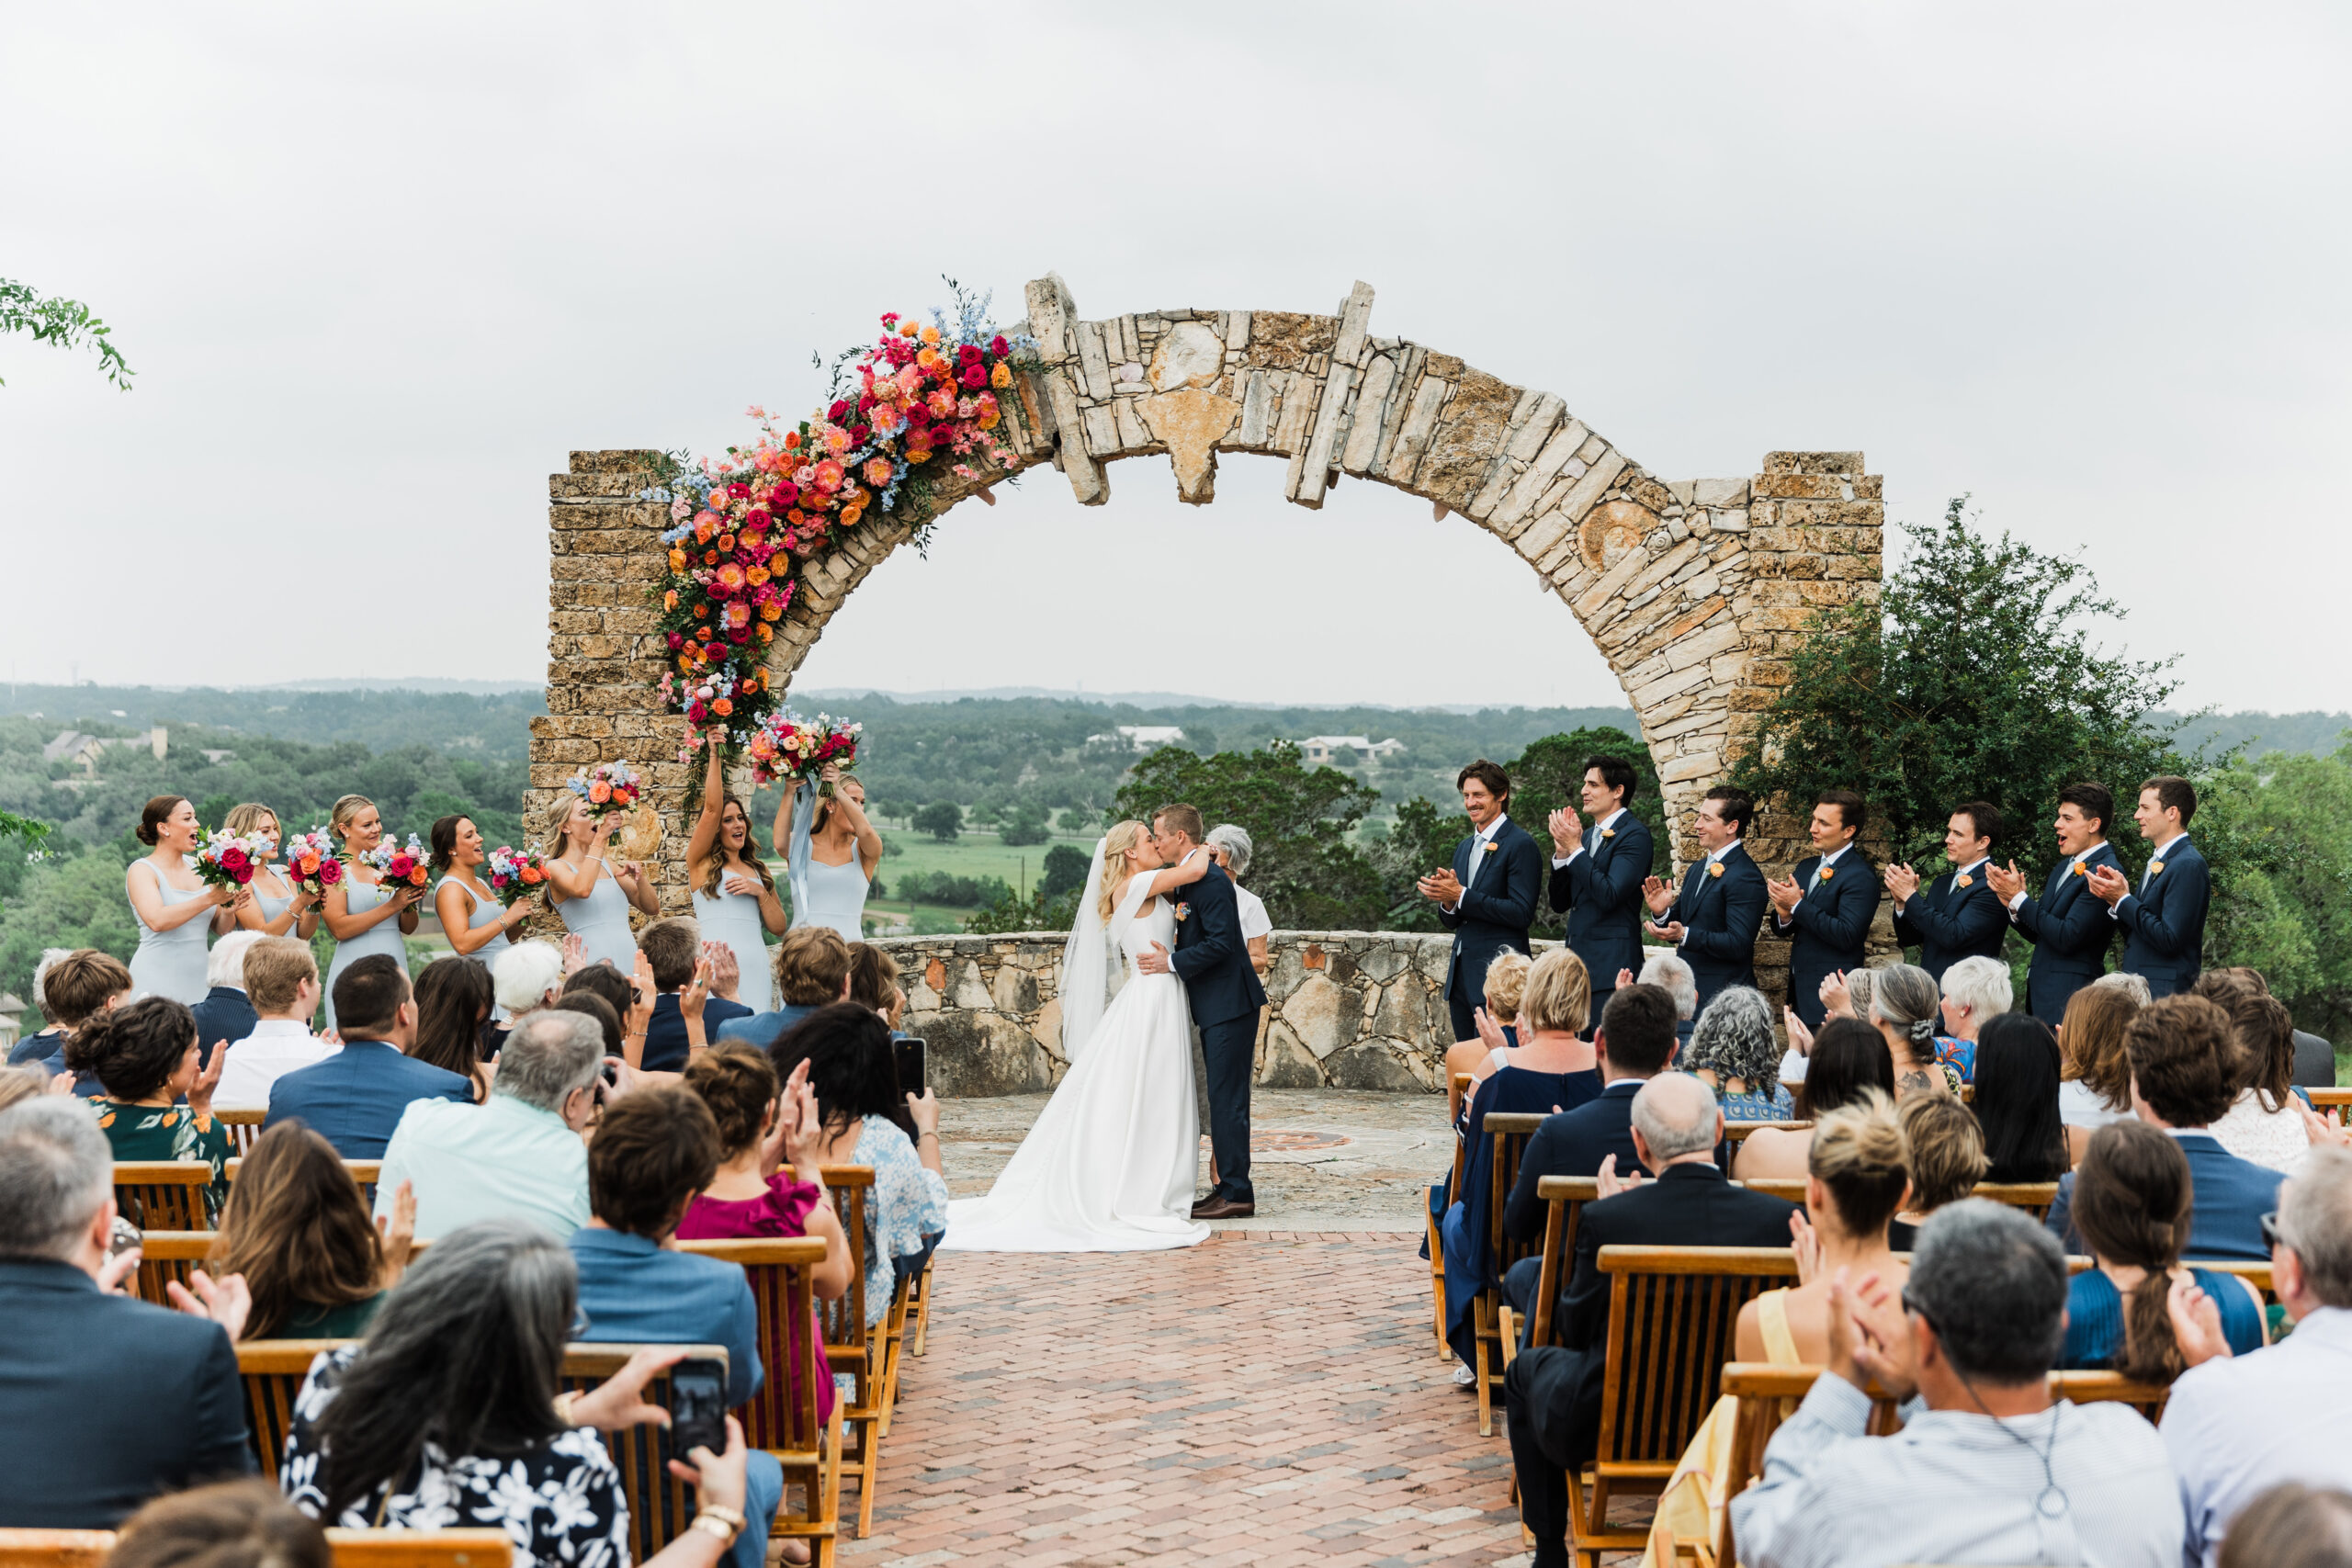 Genuine, Fun, & Vibrant Wedding at Camp Lucy in Dripping Springs, TX